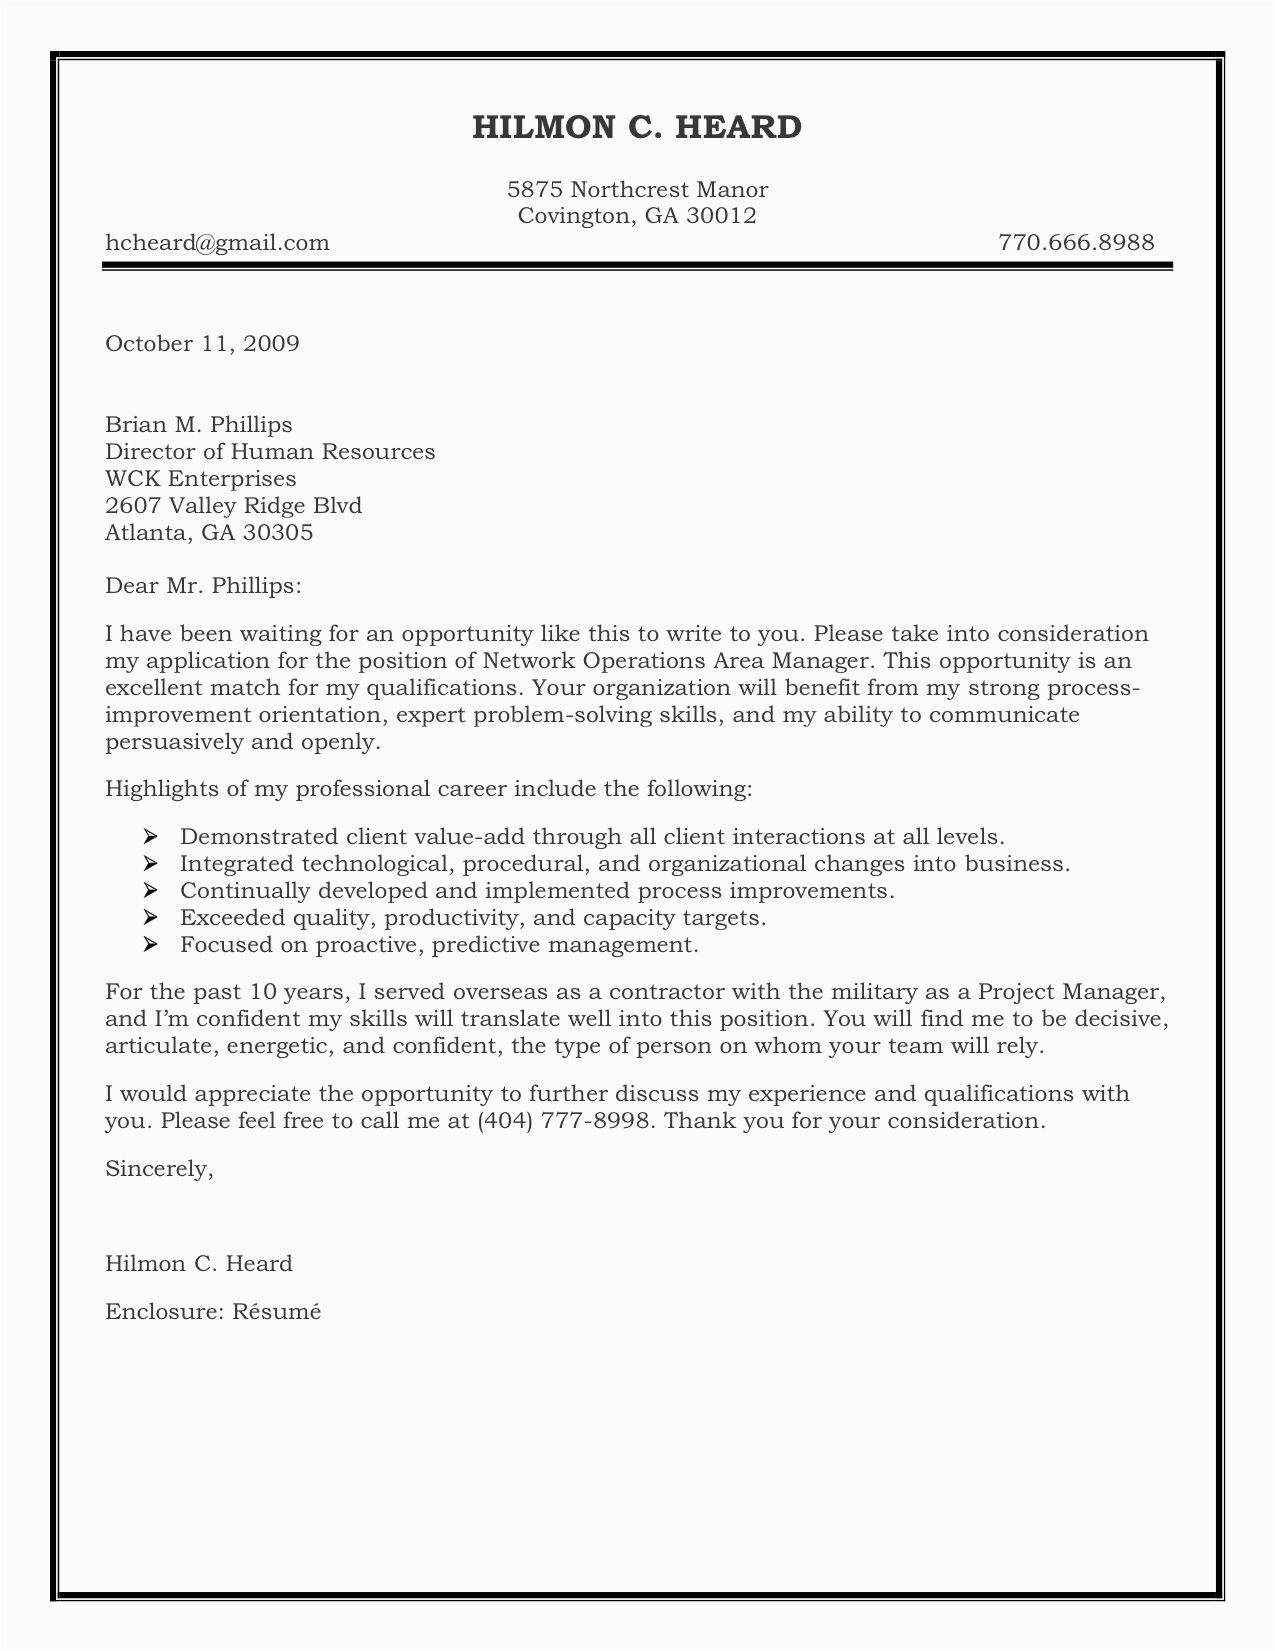 Free Sample Cover Letters for Resumes Examples Sample Cover Letter for Resume